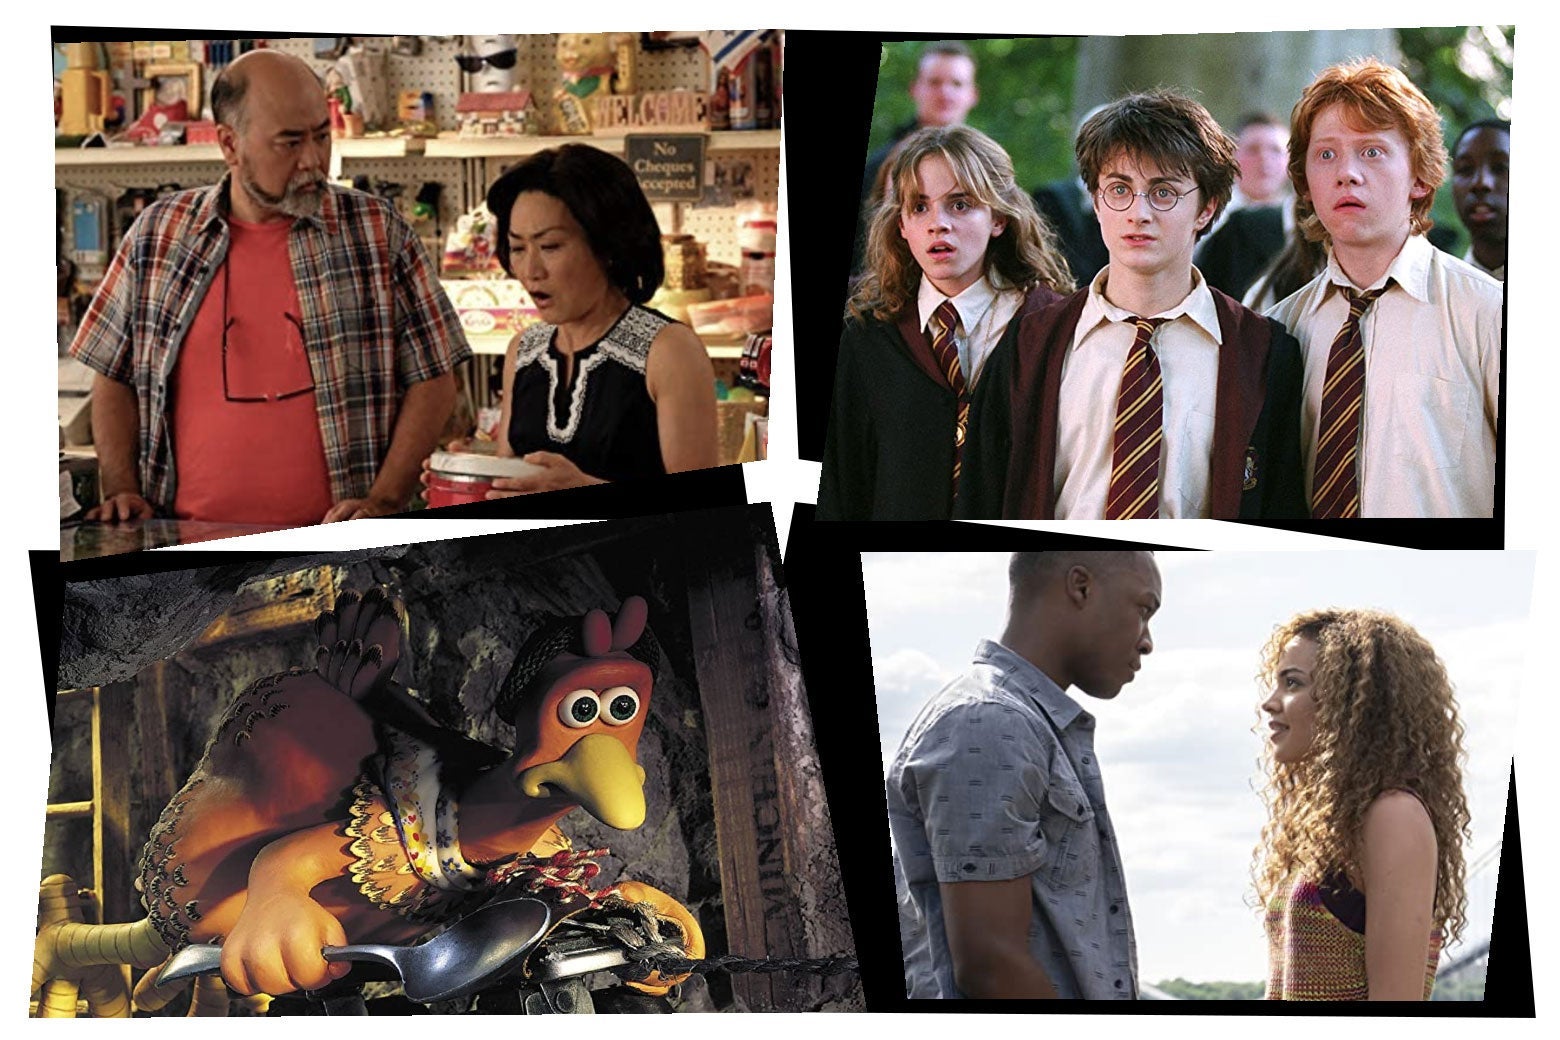 In a mosaic style, stills of: Paul Sun-Hyung Lee with Jean Yoon in a convenience store; Emma Watson, Daniel Radcliffe, and Rupert Grint wearing Hogwarts uniforms; a stop-motion animated chicken holding a spoon; Corey Hawkins and Leslie Grace standing facing one another.